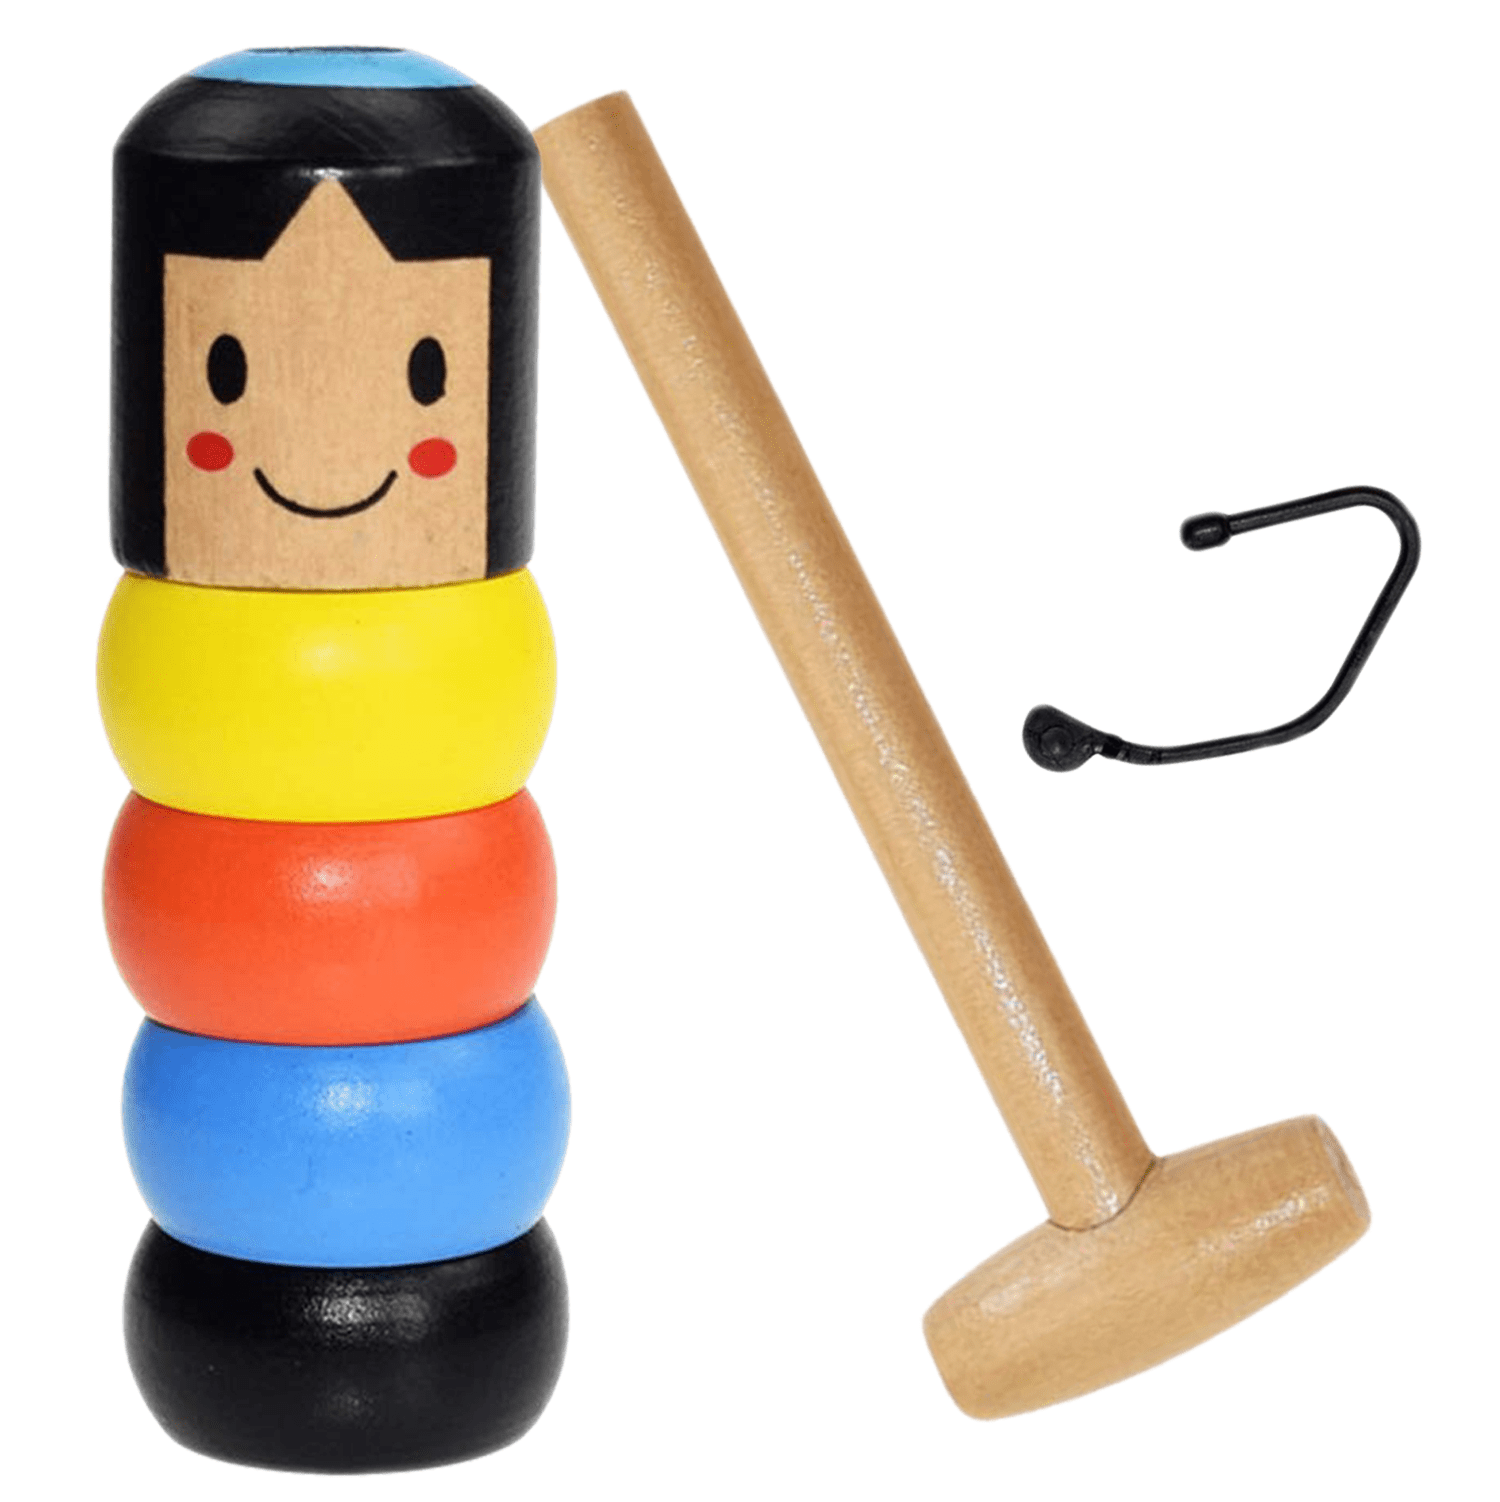 Unbreakable Wooden Man Magic Toy Toys For Children SELL HOT Gifts Bes I9K9 